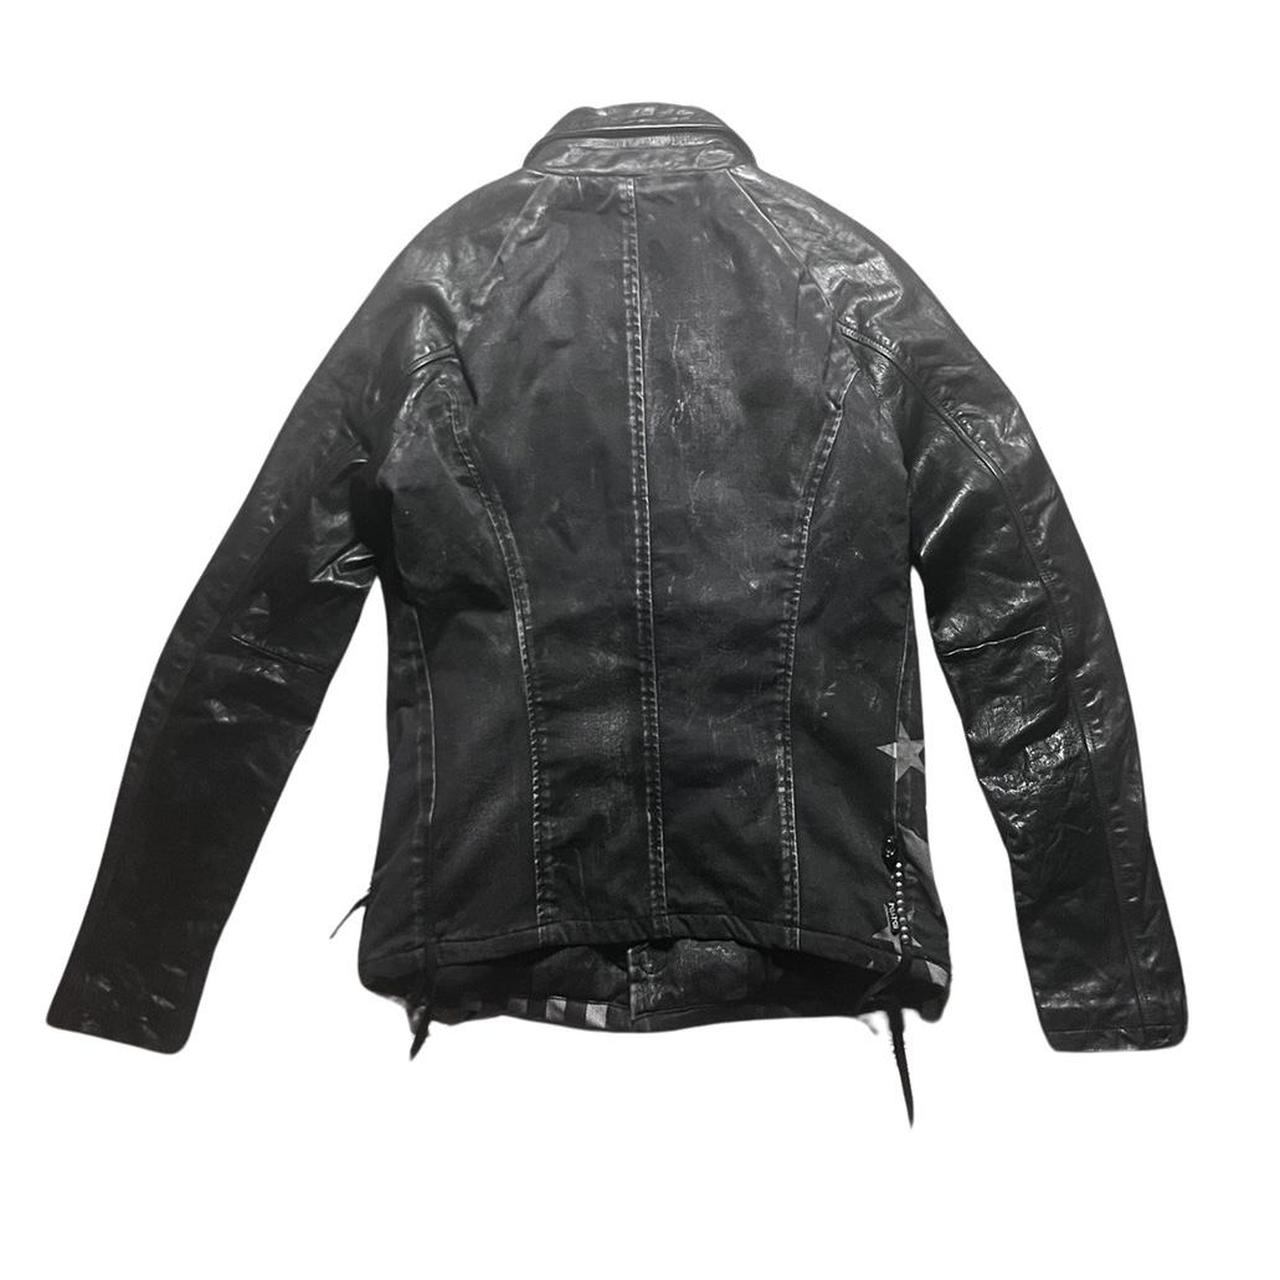 KMRii Leather Riders Jacket, Beautiful design and